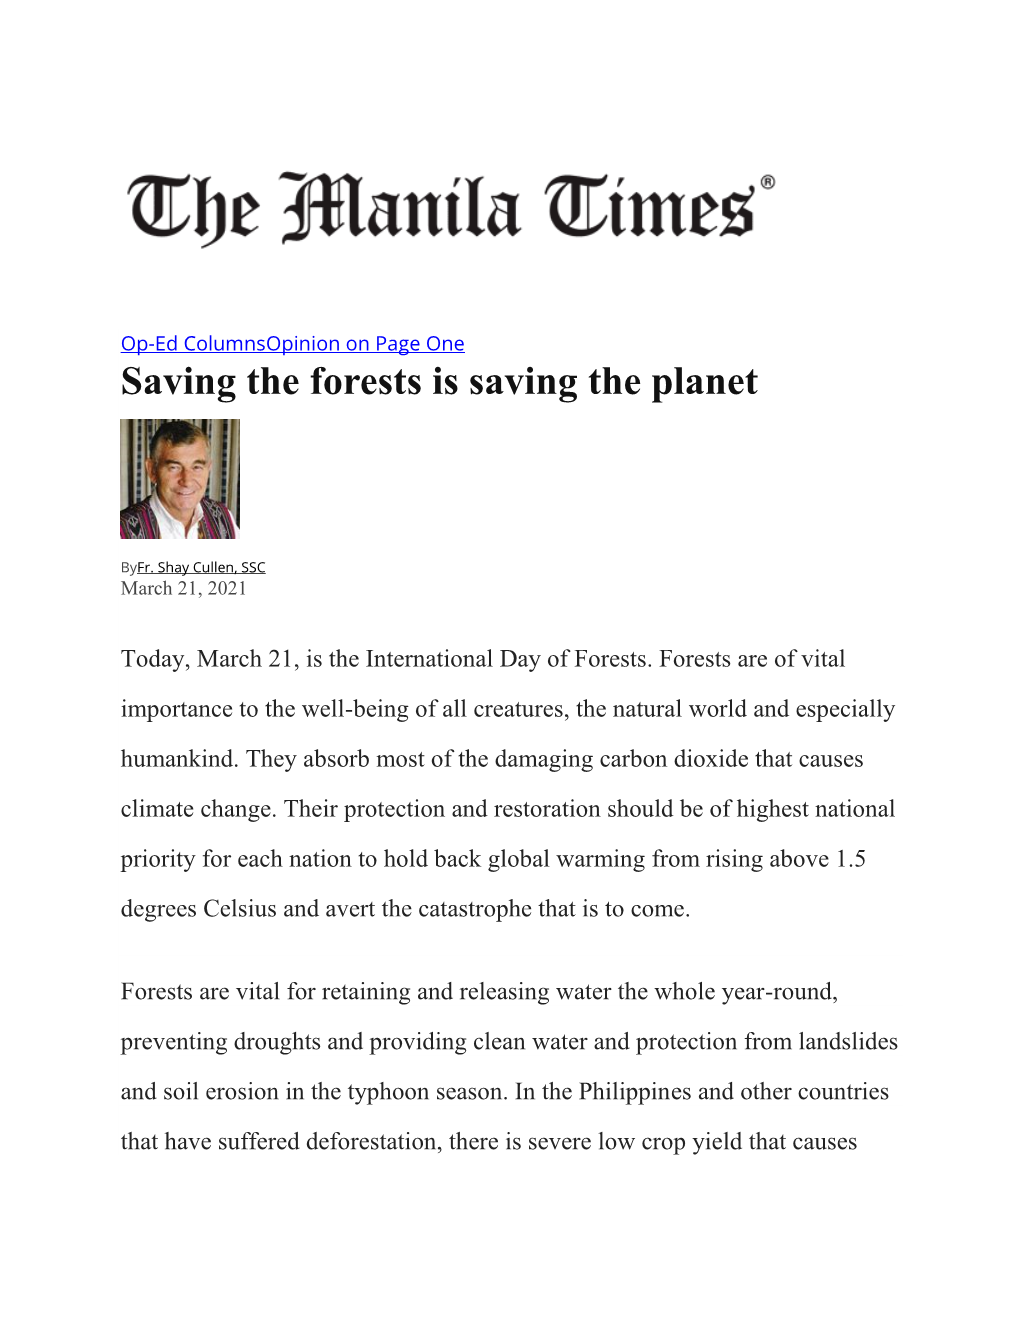 210321 MTIMES Cullen Saving the Forests Is Saving the Planet.Pdf